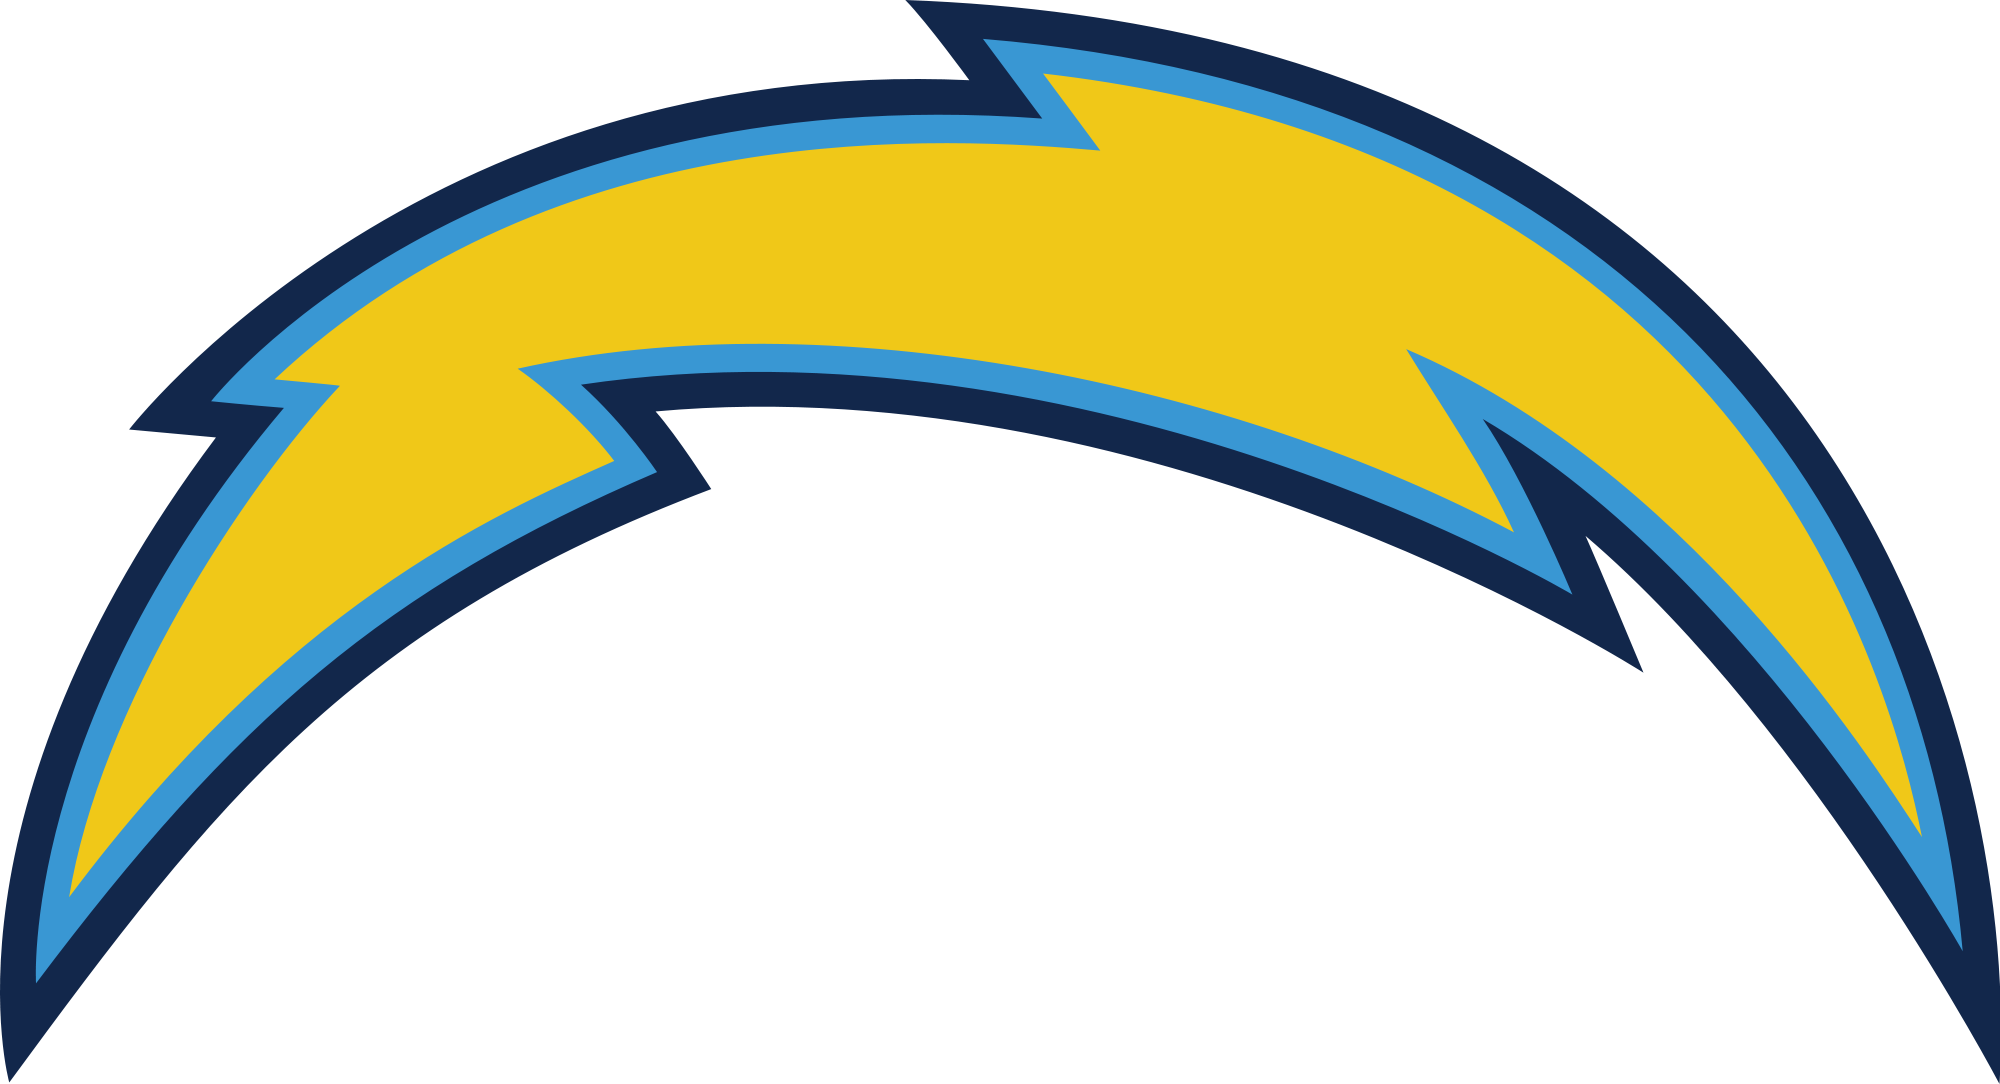 San Diego Chargers Nfl Football Wallpaper